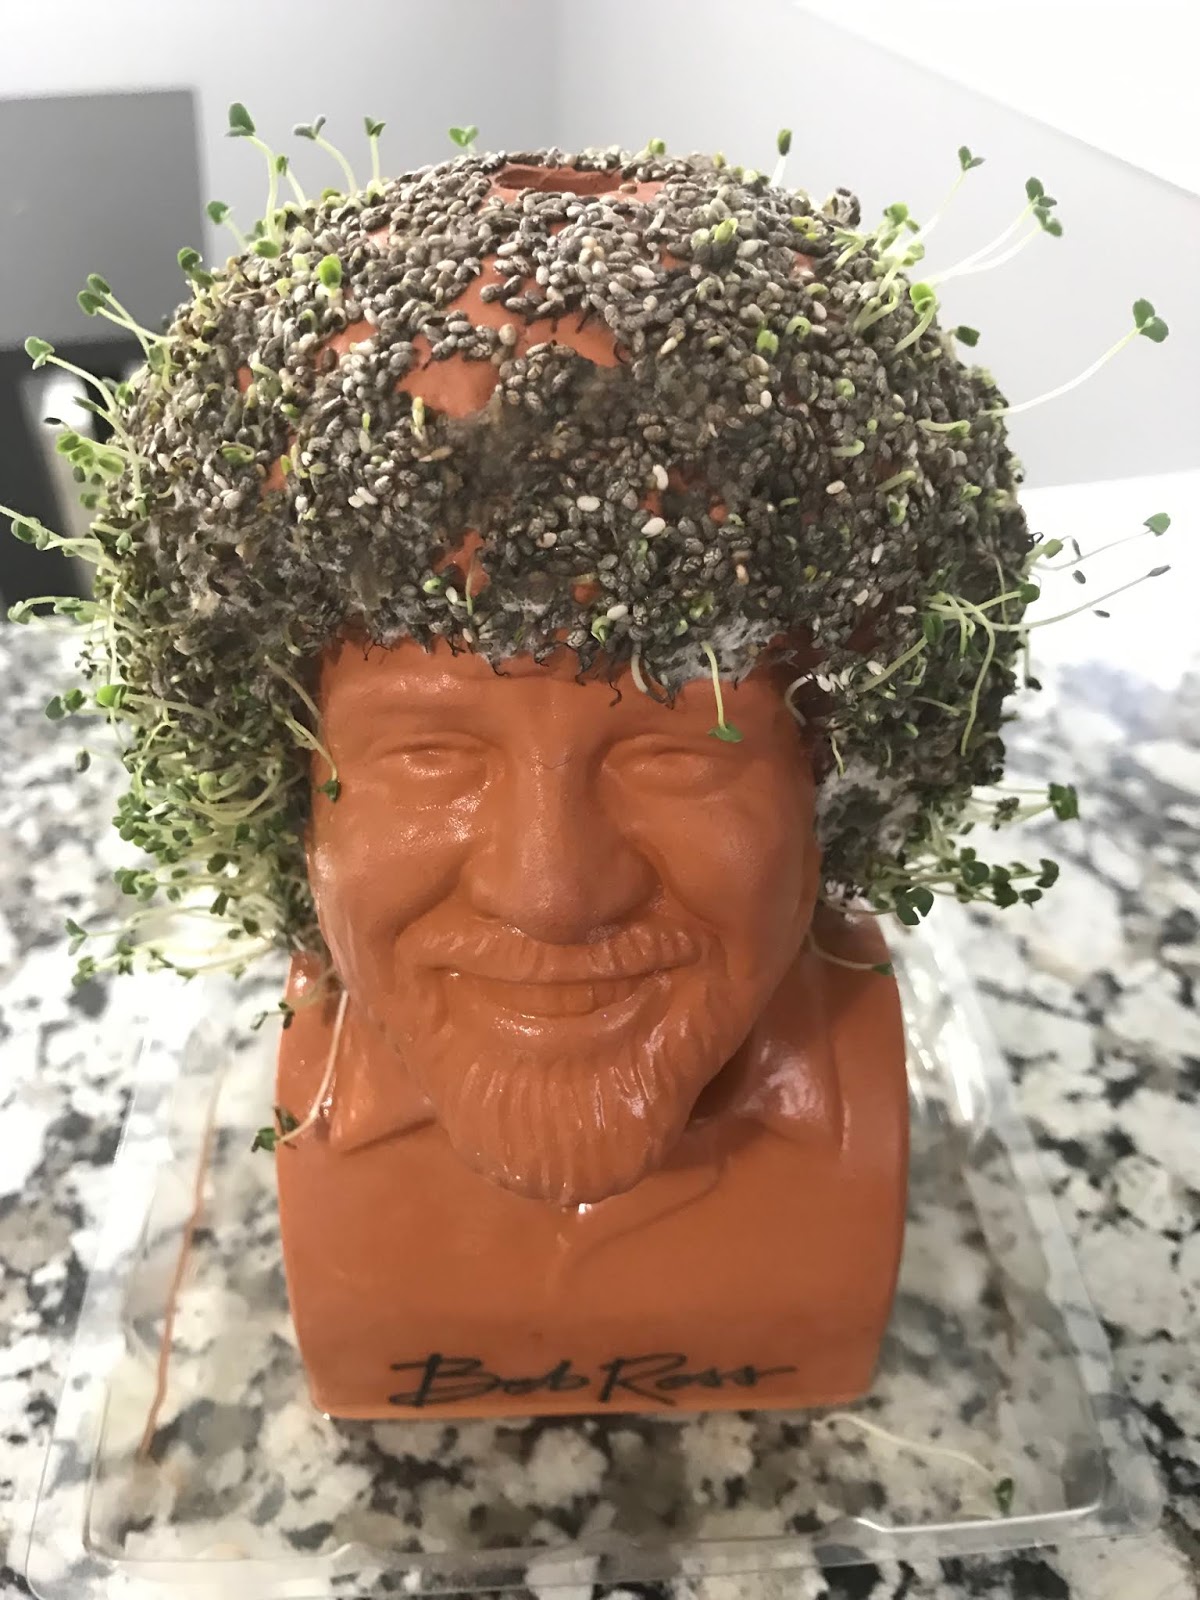 My bob Ross chia pet sprouted : r/mildlyinteresting